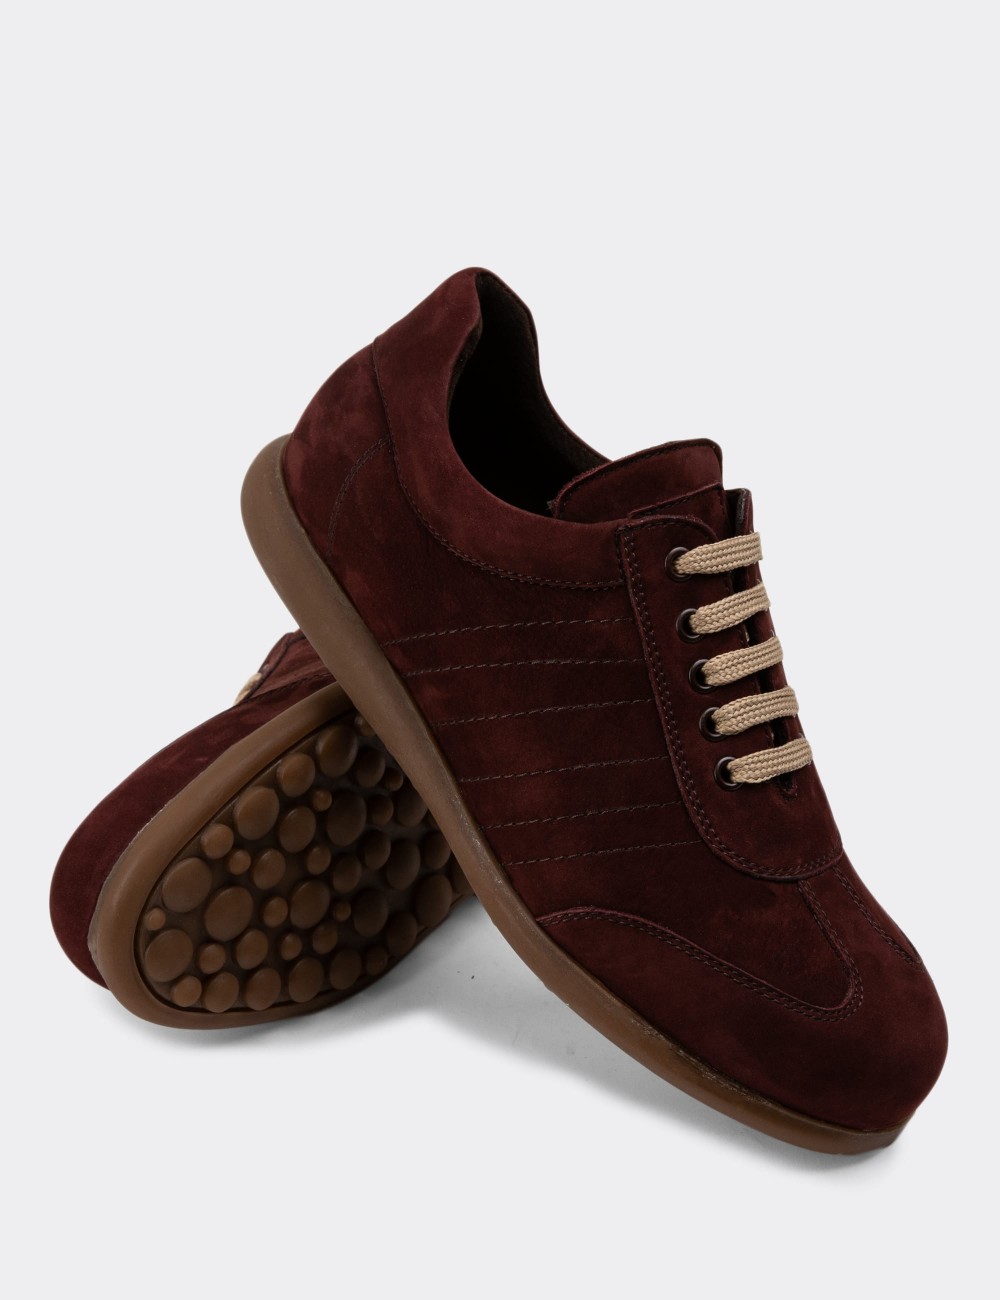 Burgundy Suede Leather Lace-up Shoes - 01826MBRDC05